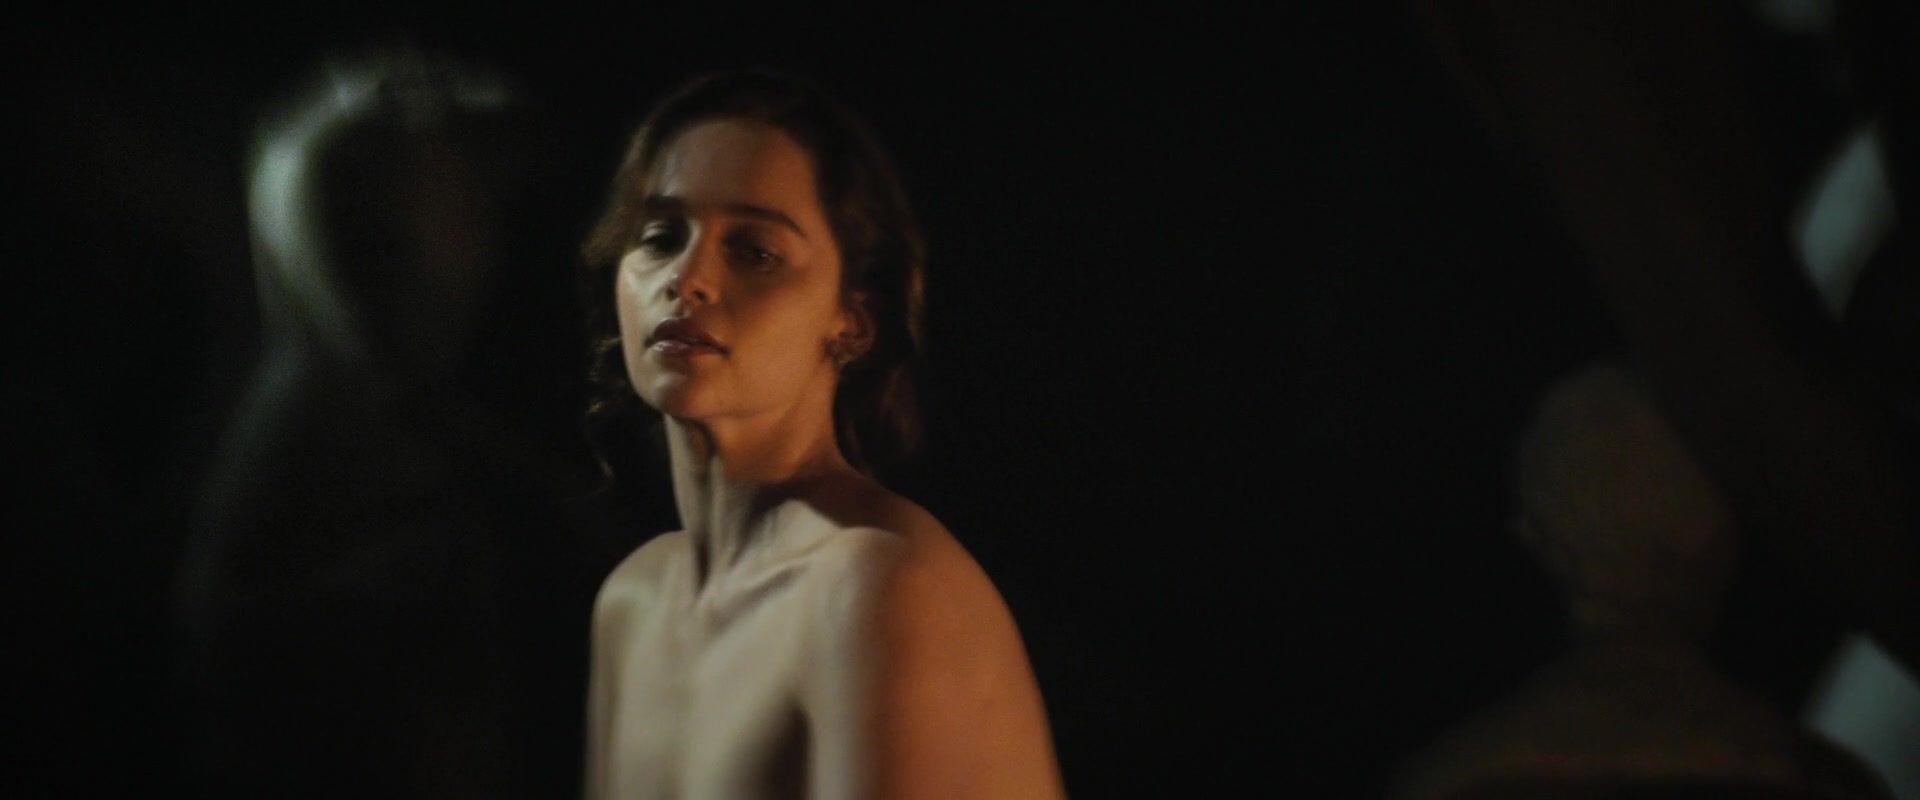 Dirty Naked Emilia Clarke in topless scene of the movie "Voice from the Stone" | Released in 2017 Celebrity Sex